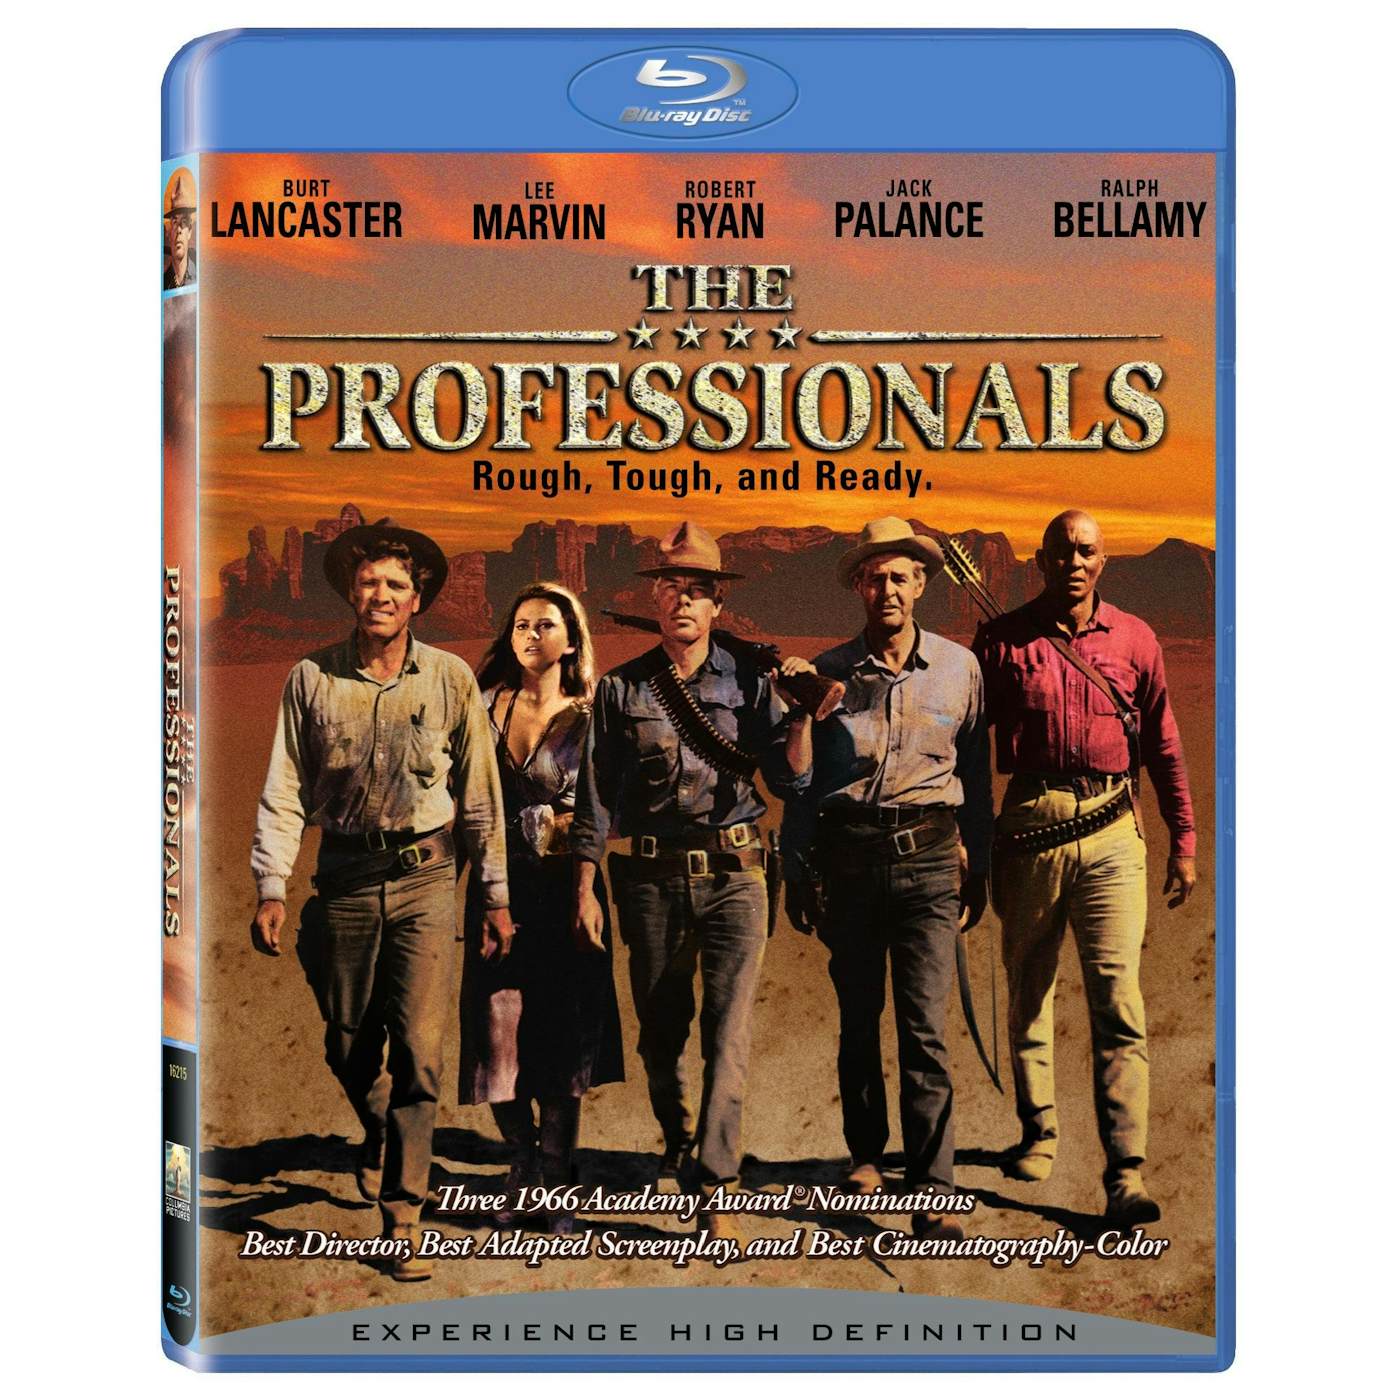 The Professionals (1966) Blu-ray